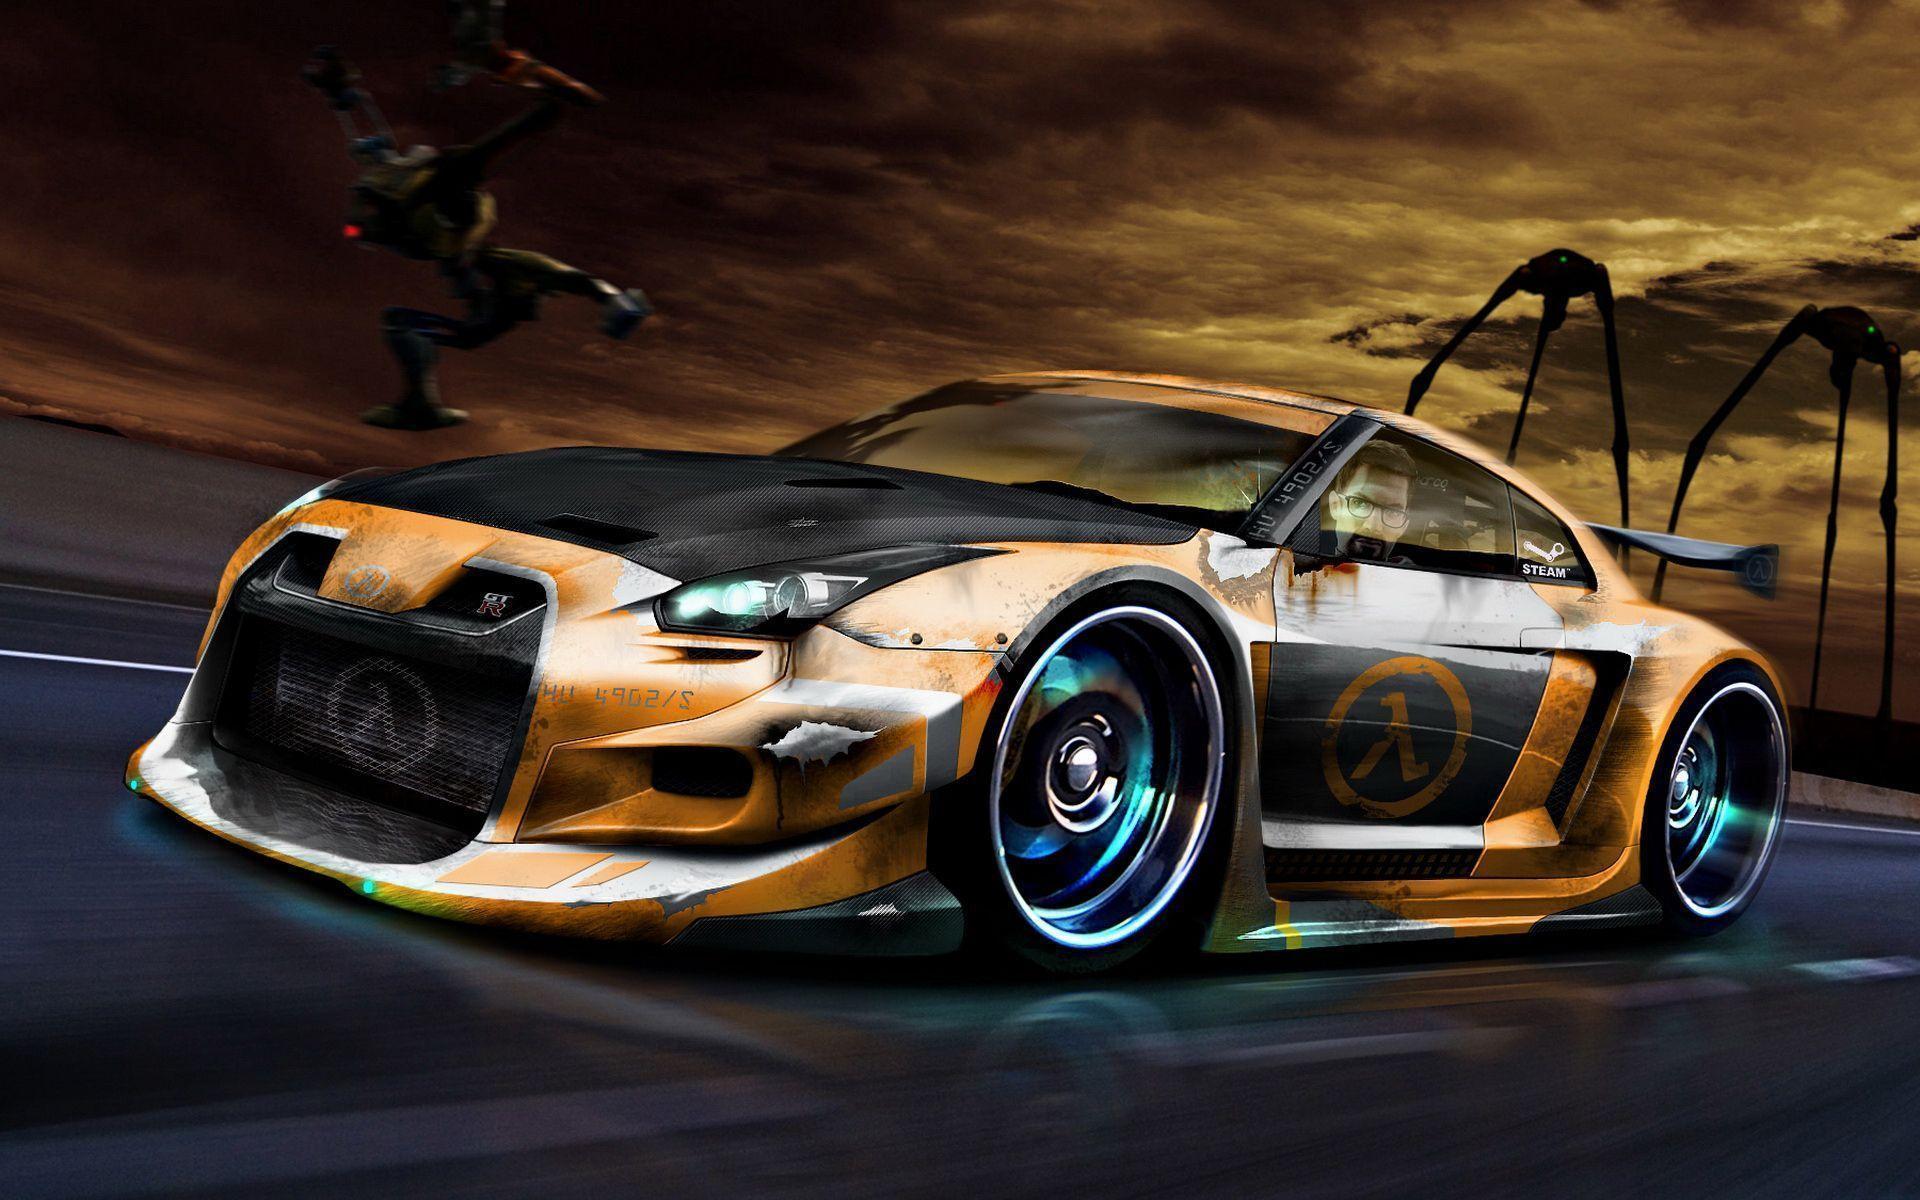 cool sport cars background. vergapipe